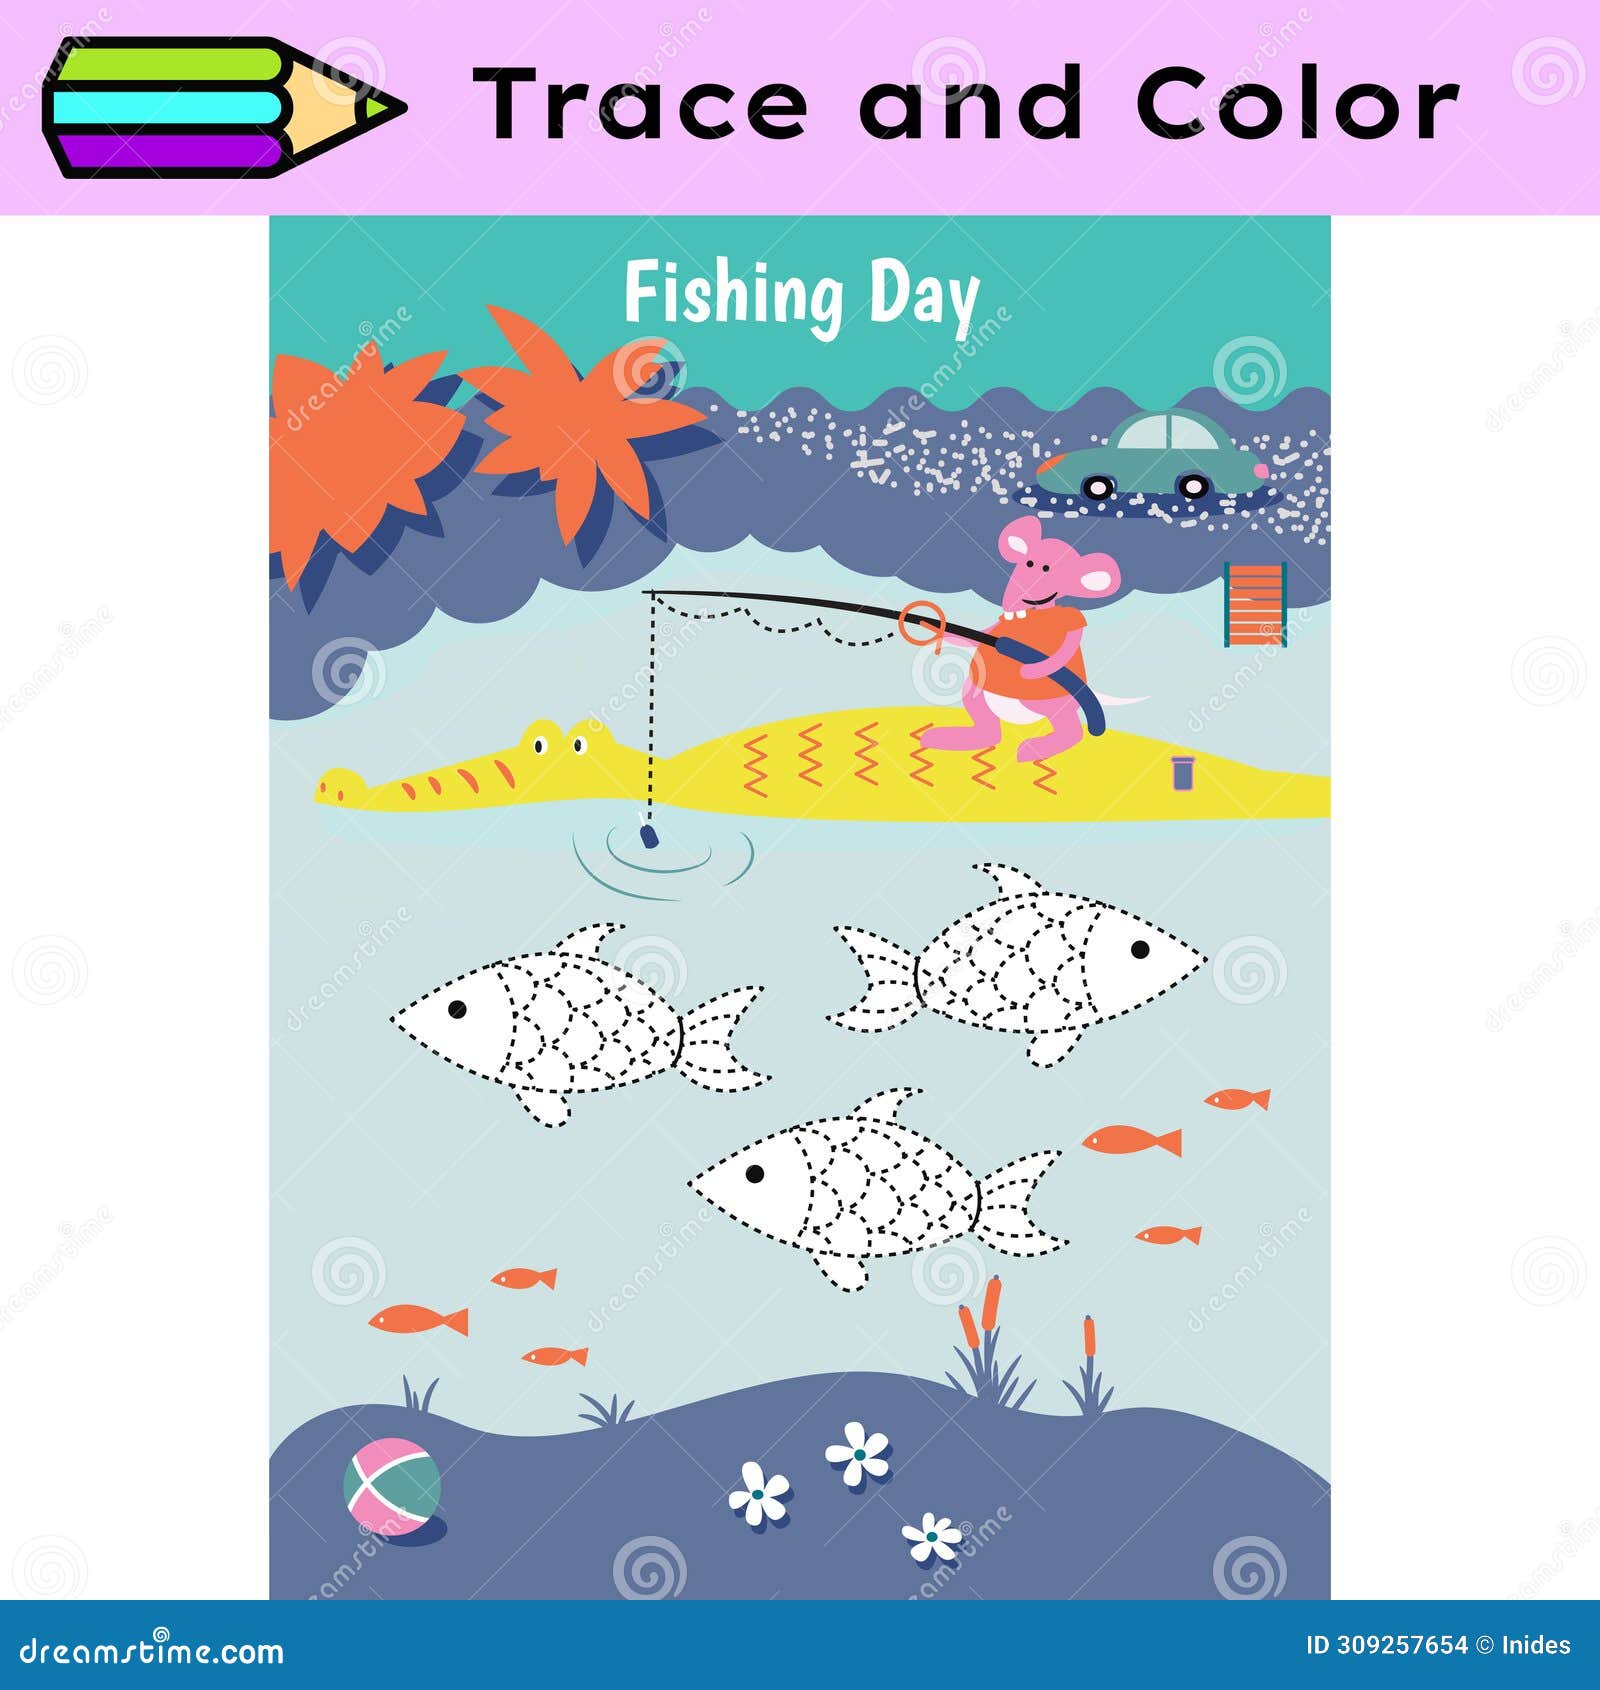 pen tracing lines activity worksheet for children. pencil control for kids practicing motoric skills. fishing day